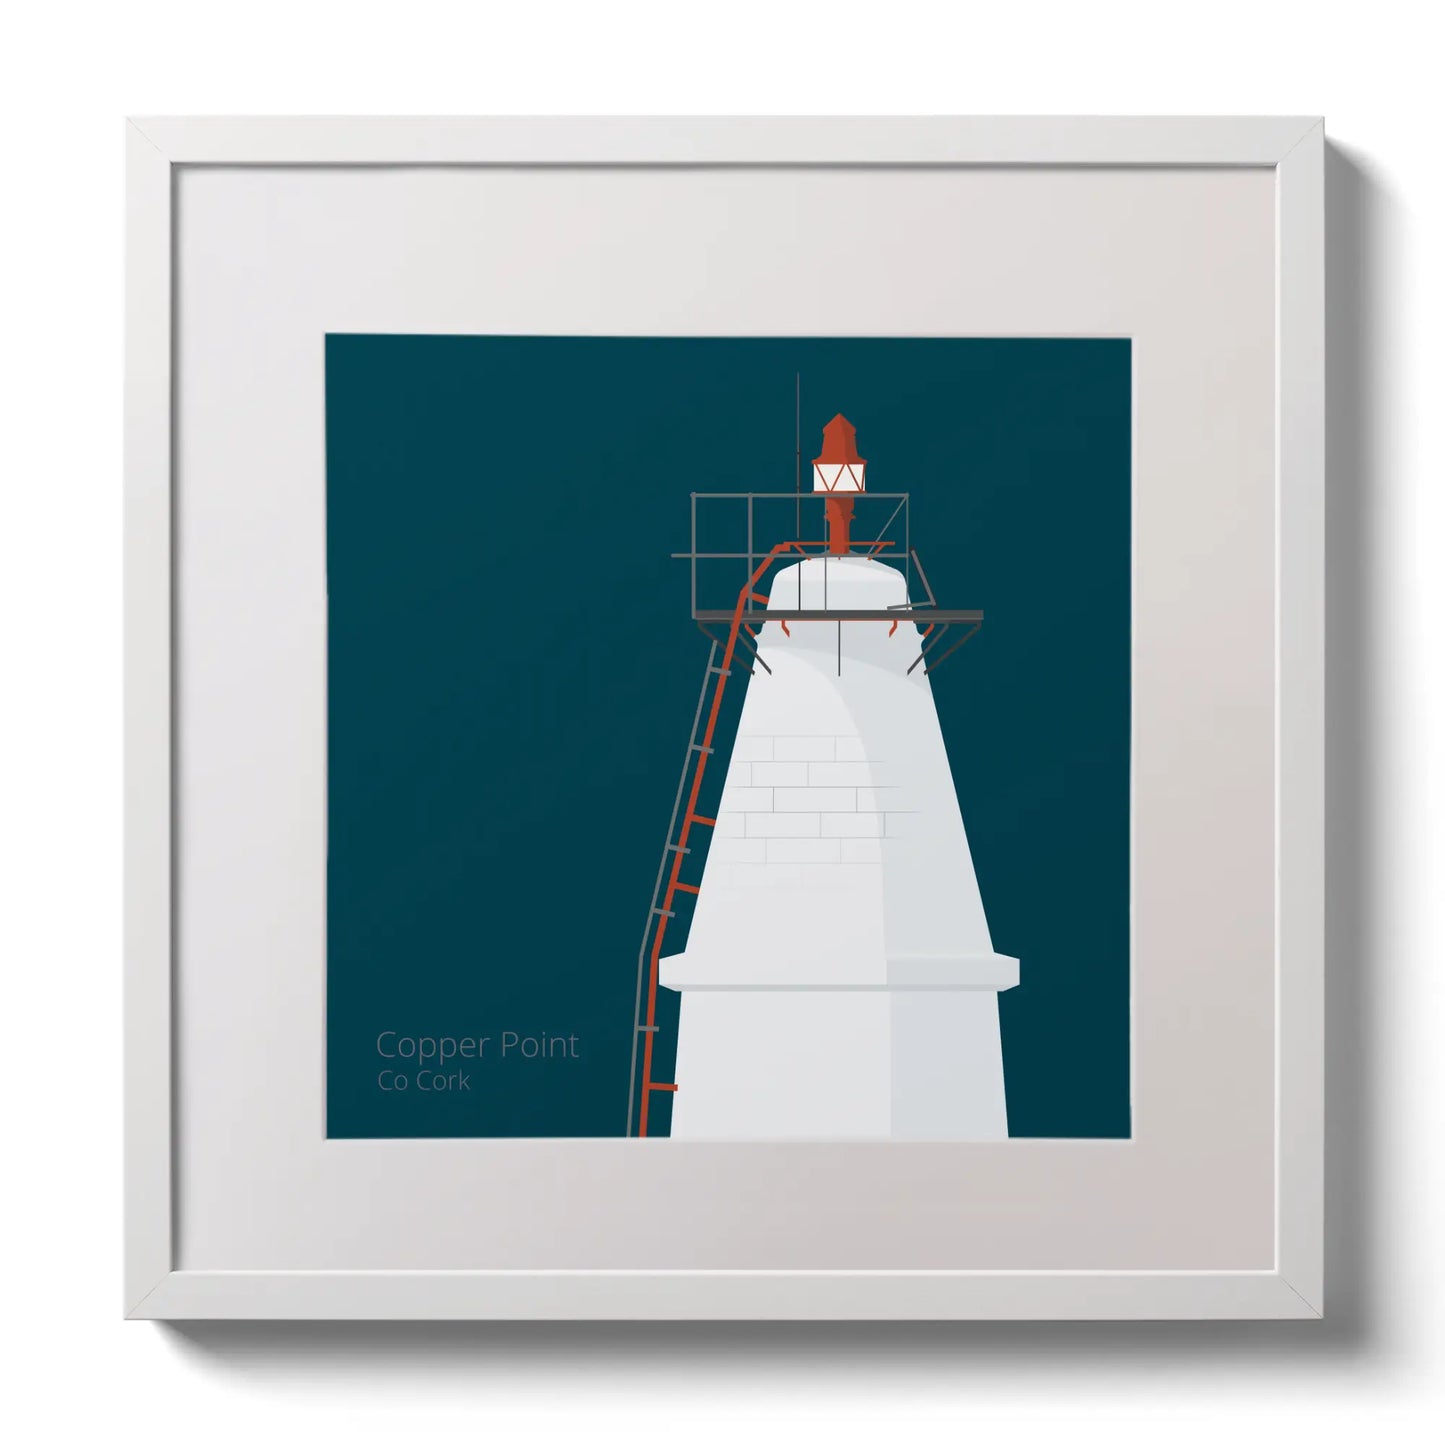 Illustration Copper Point lighthouse on a midnight blue background,  in a white square frame measuring 30x30cm.